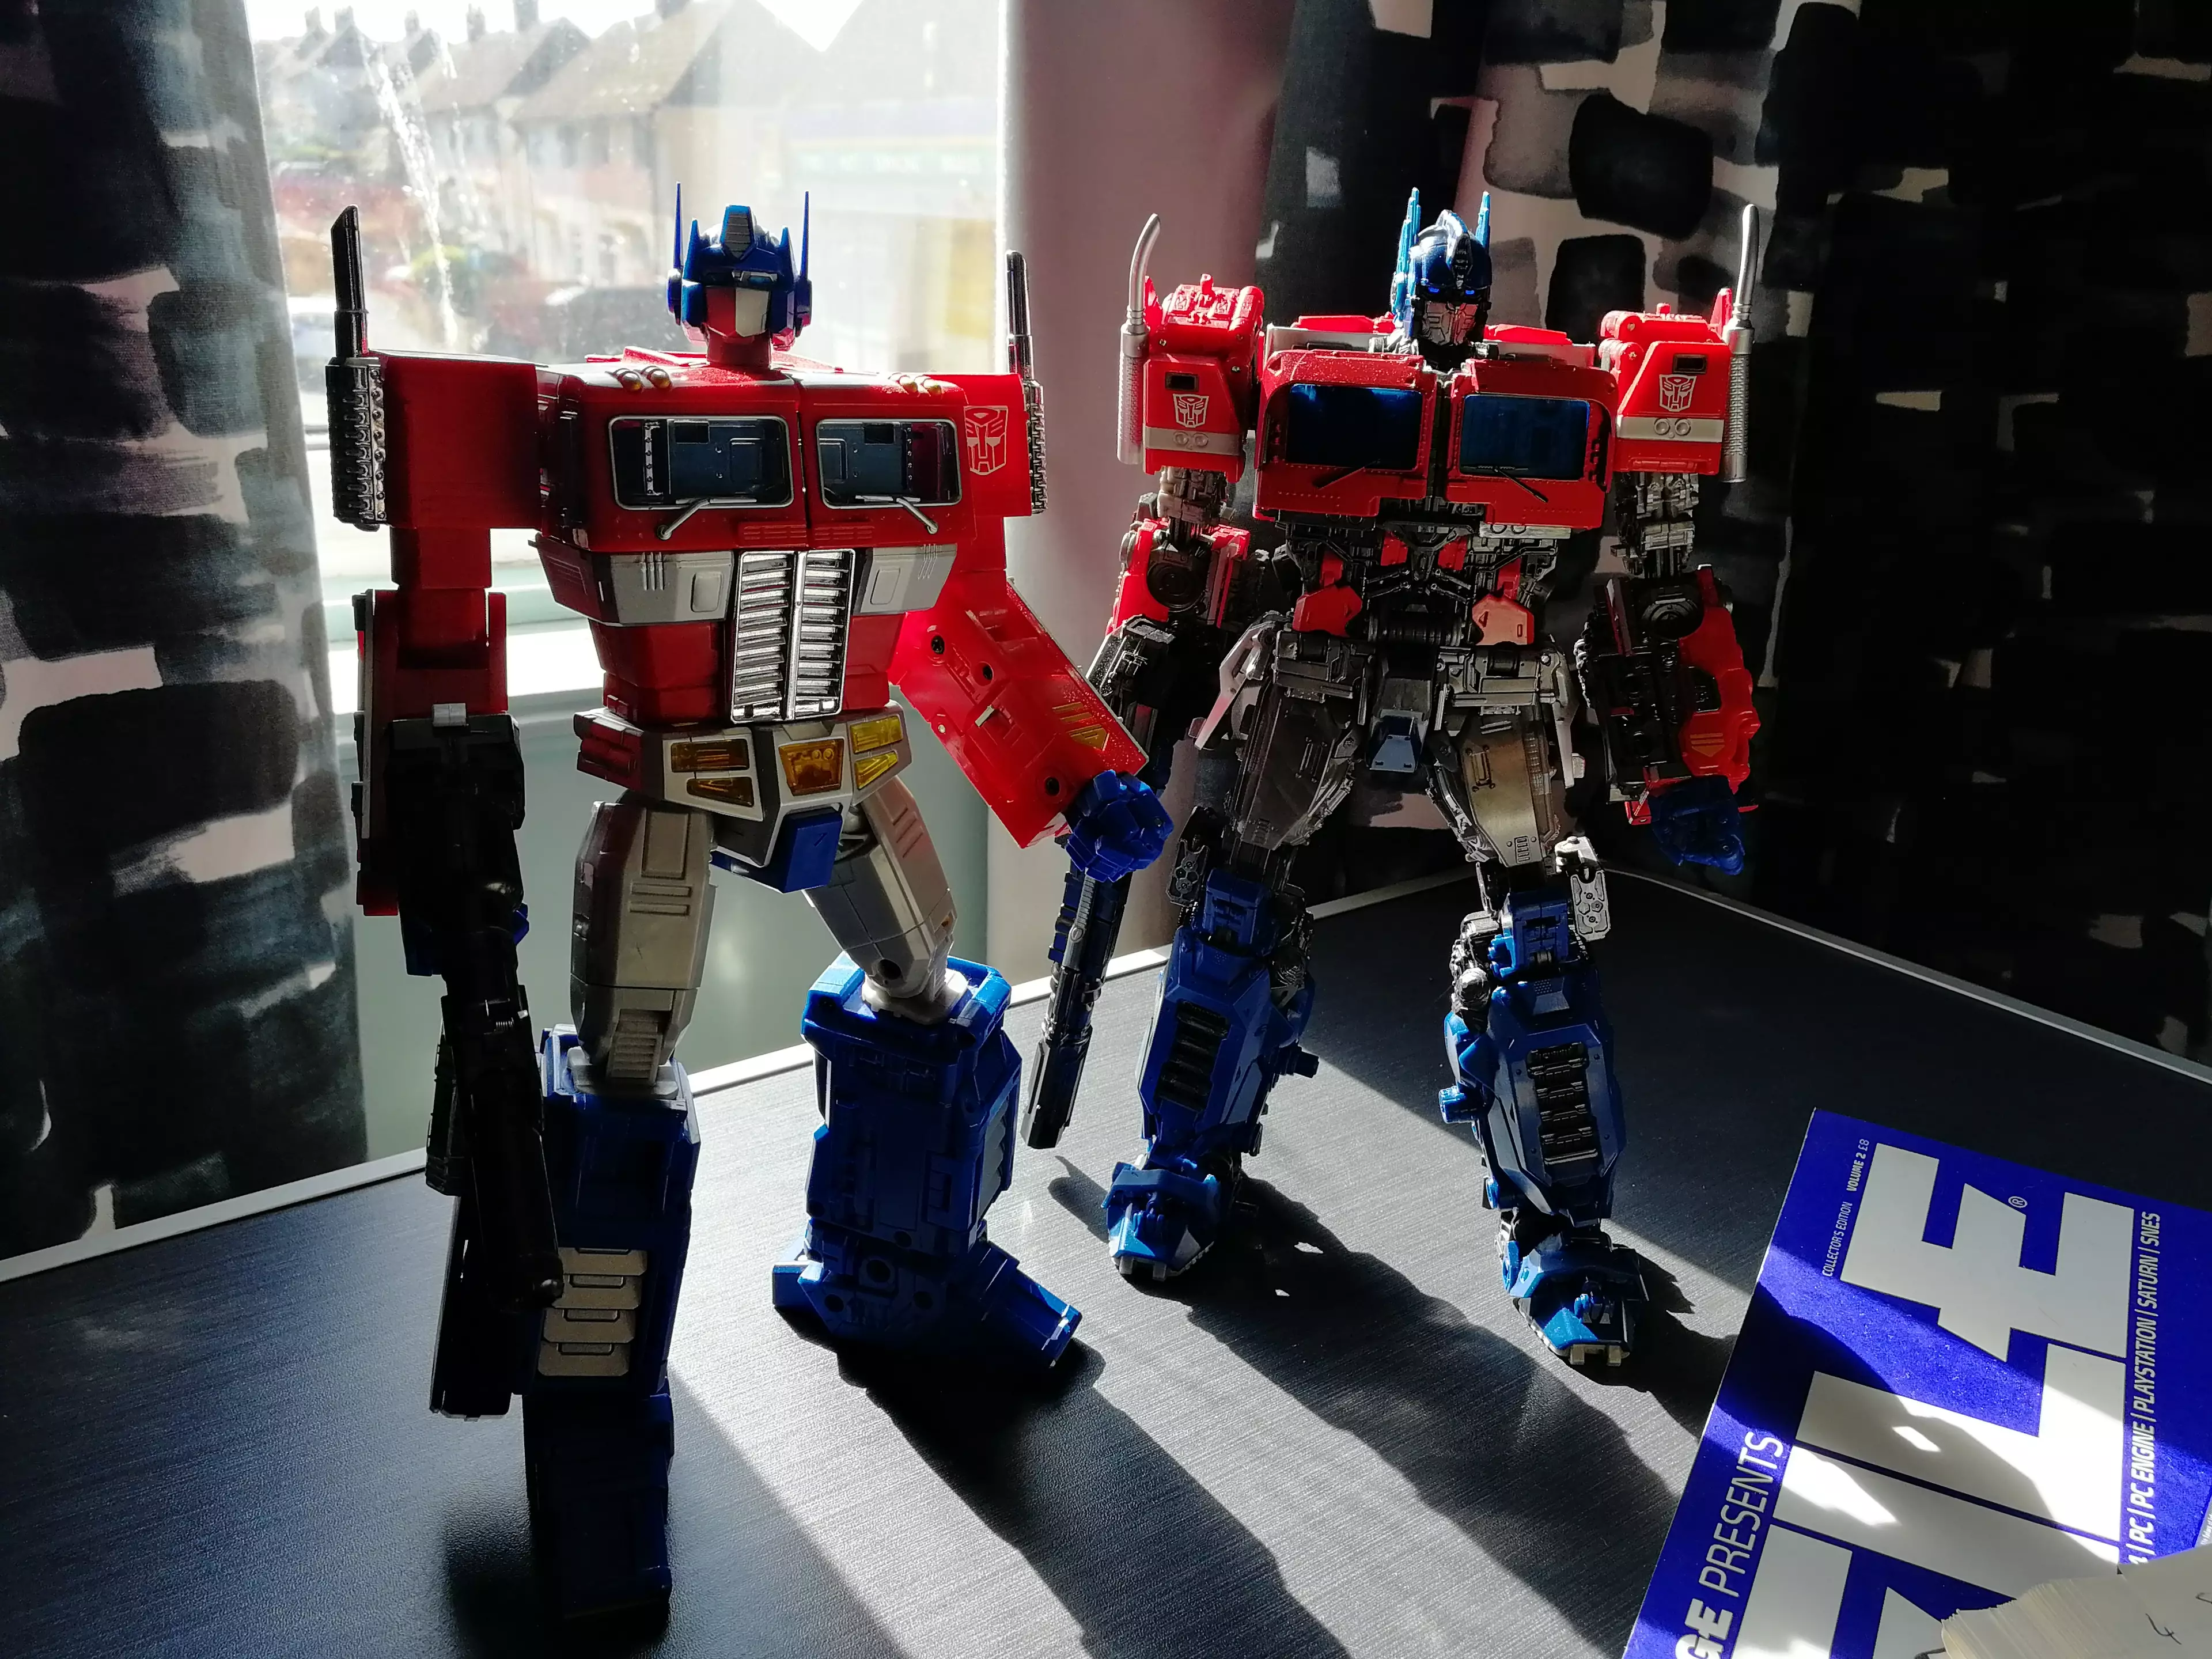 MPM-12 beside an older Masterpiece-line Optimus Prime, MP10 / credit: the author